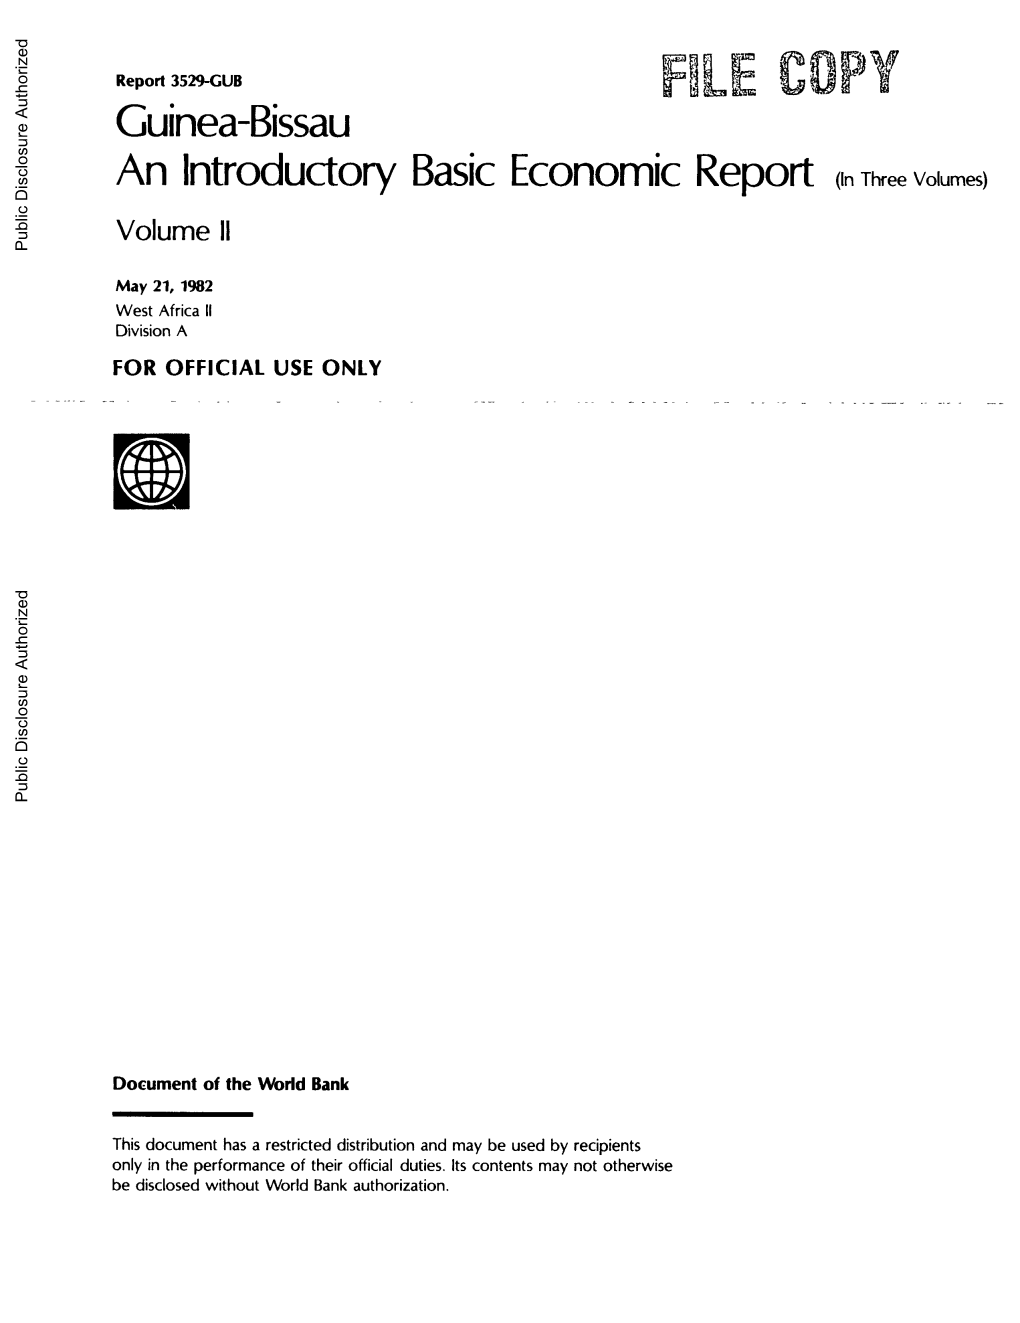 Guinea-Bissau an Introductory Basic Economic Report (Inthree Volumes) Volume 11 Public Disclosure Authorized